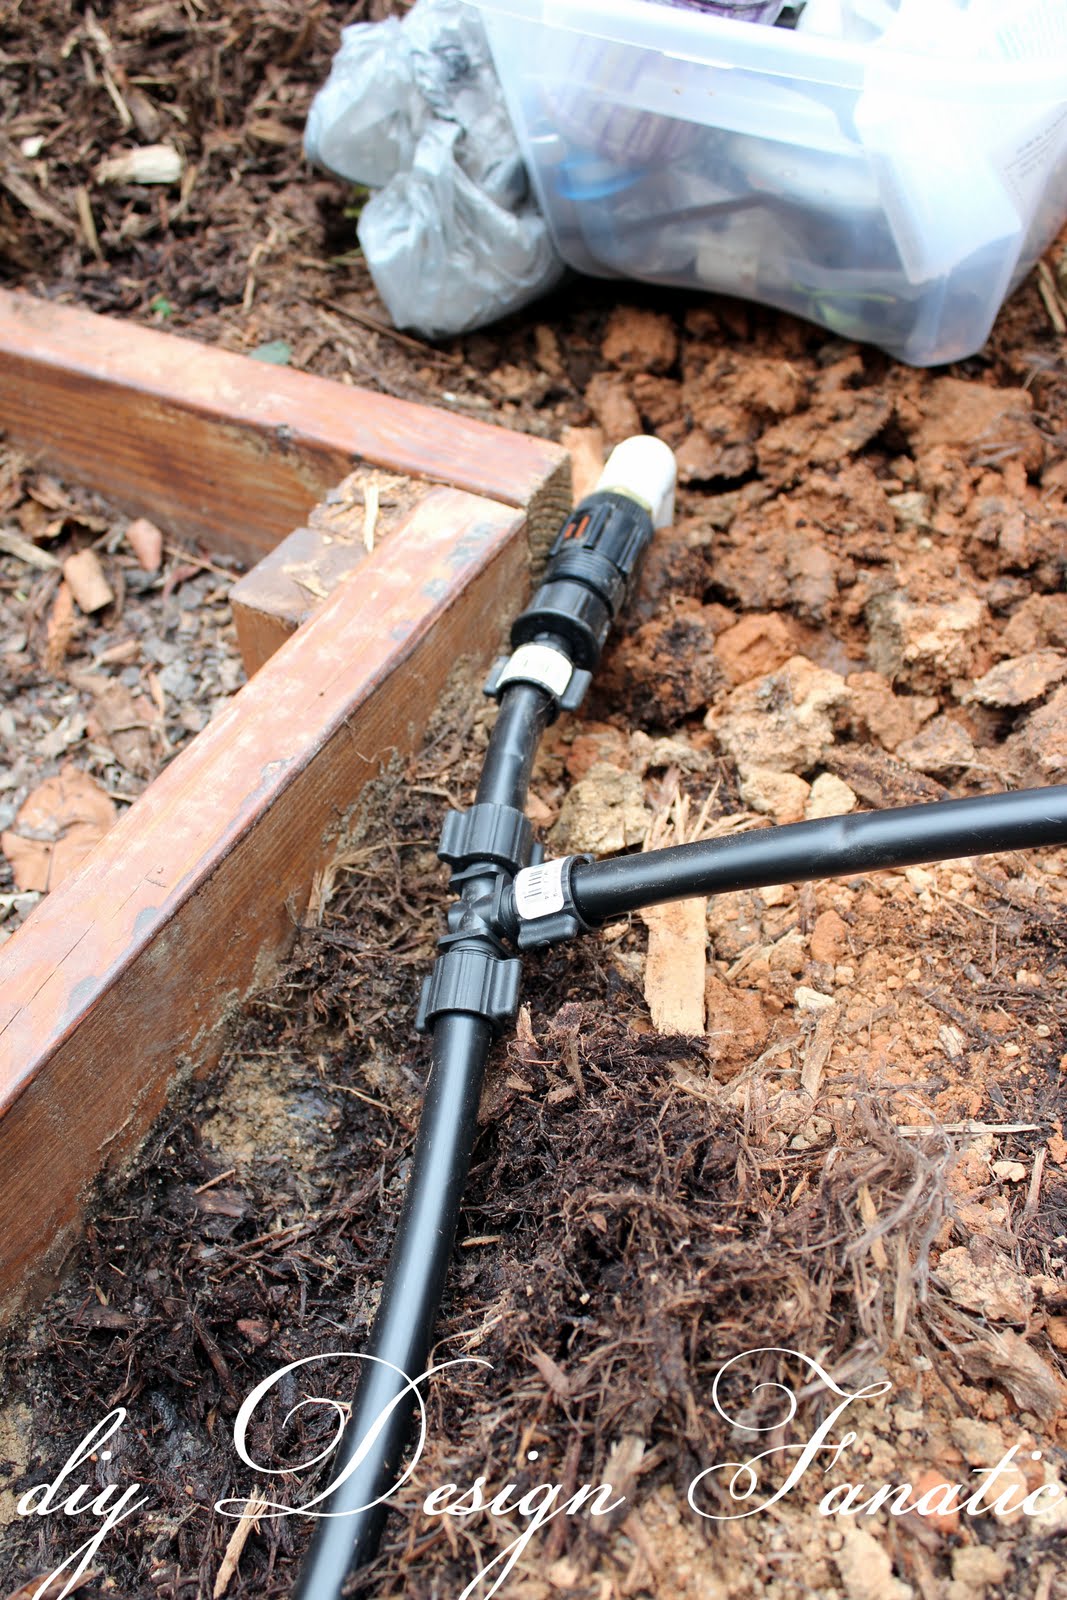 diy Design Fanatic: Install A Drip Irrigation System To Make Your Life ...